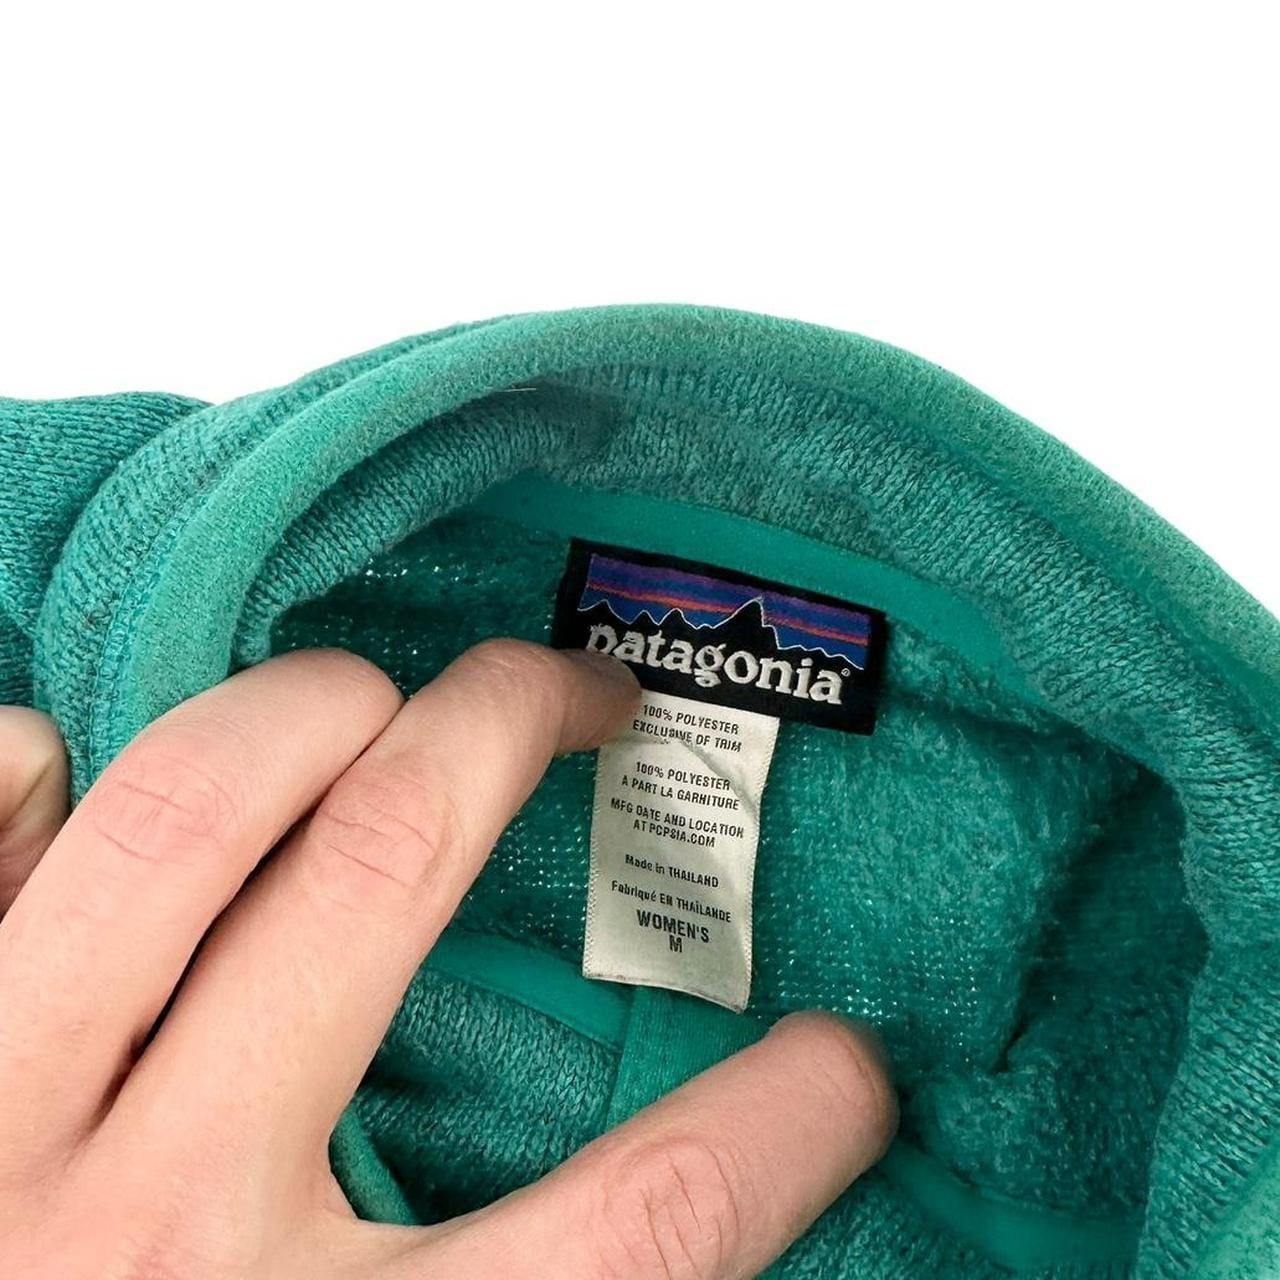 Patagonia zip jumper woman’s size M - Known Source